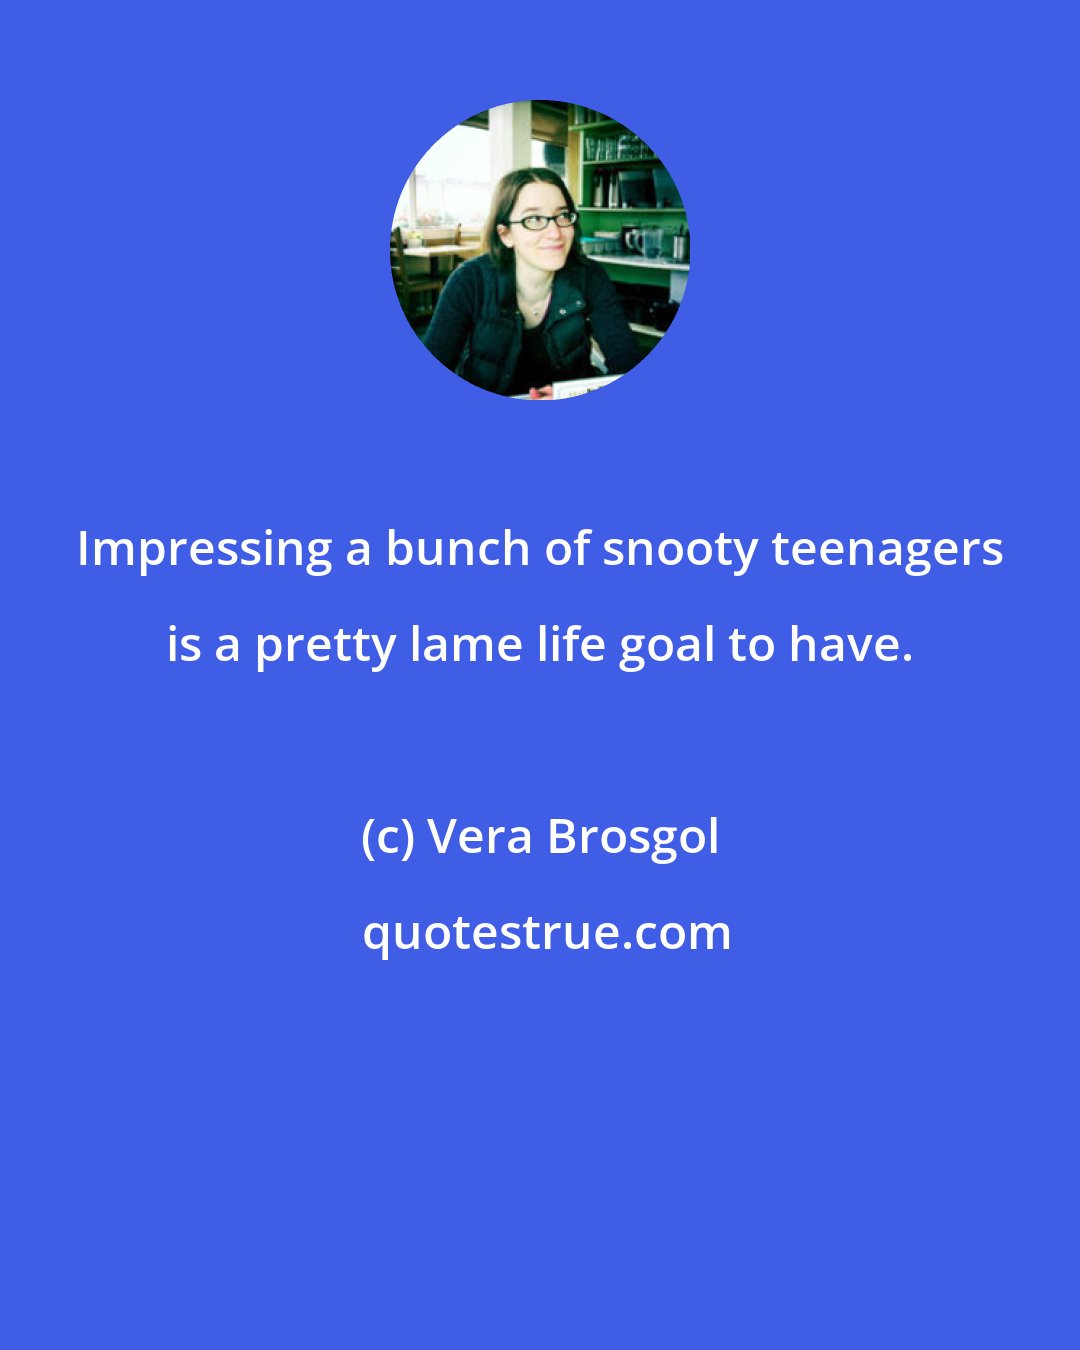 Vera Brosgol: Impressing a bunch of snooty teenagers is a pretty lame life goal to have.